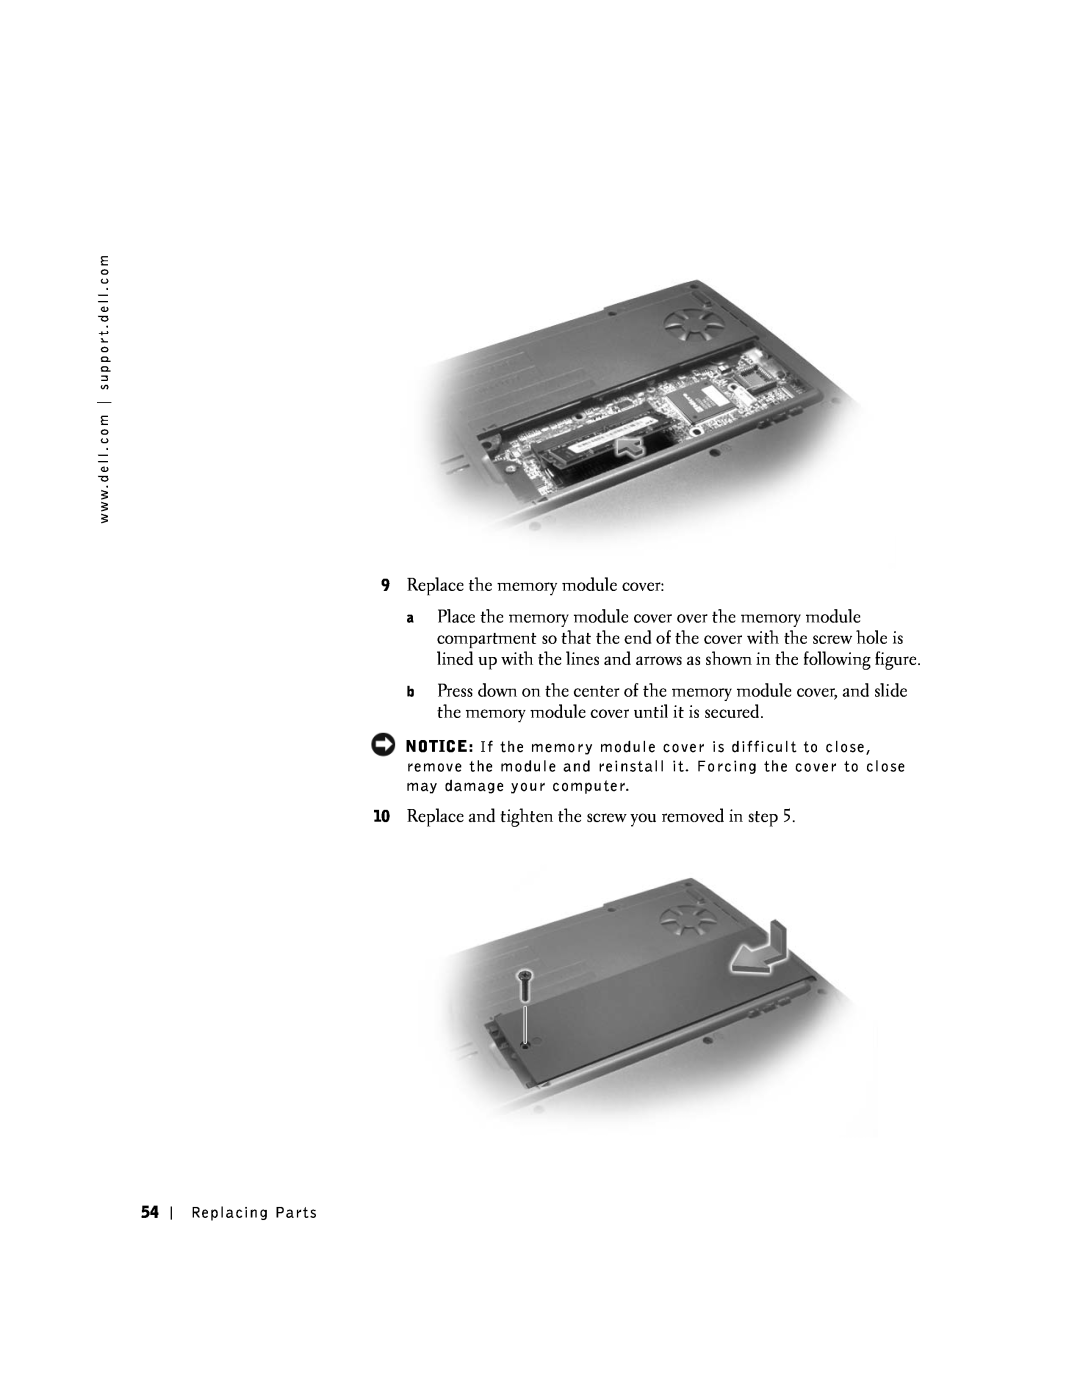 Dell 100N owner manual Replace the memory module cover 